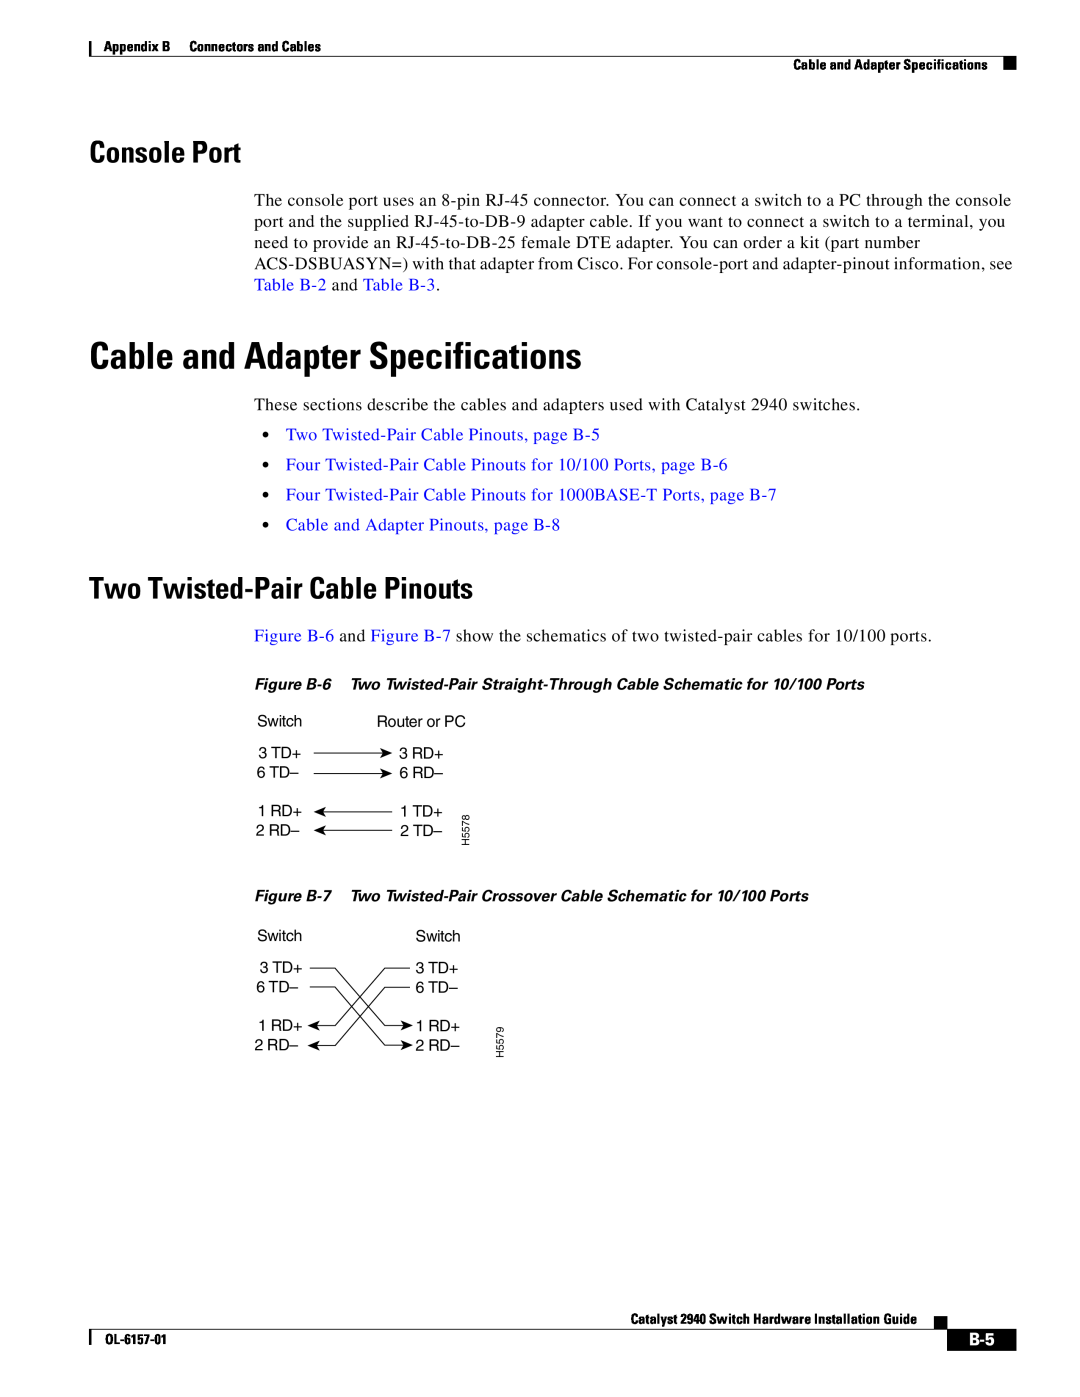 Cisco Systems OL-6157-01 manual Cable and Adapter Specifications, Two Twisted-Pair Cable Pinouts, Console Port 